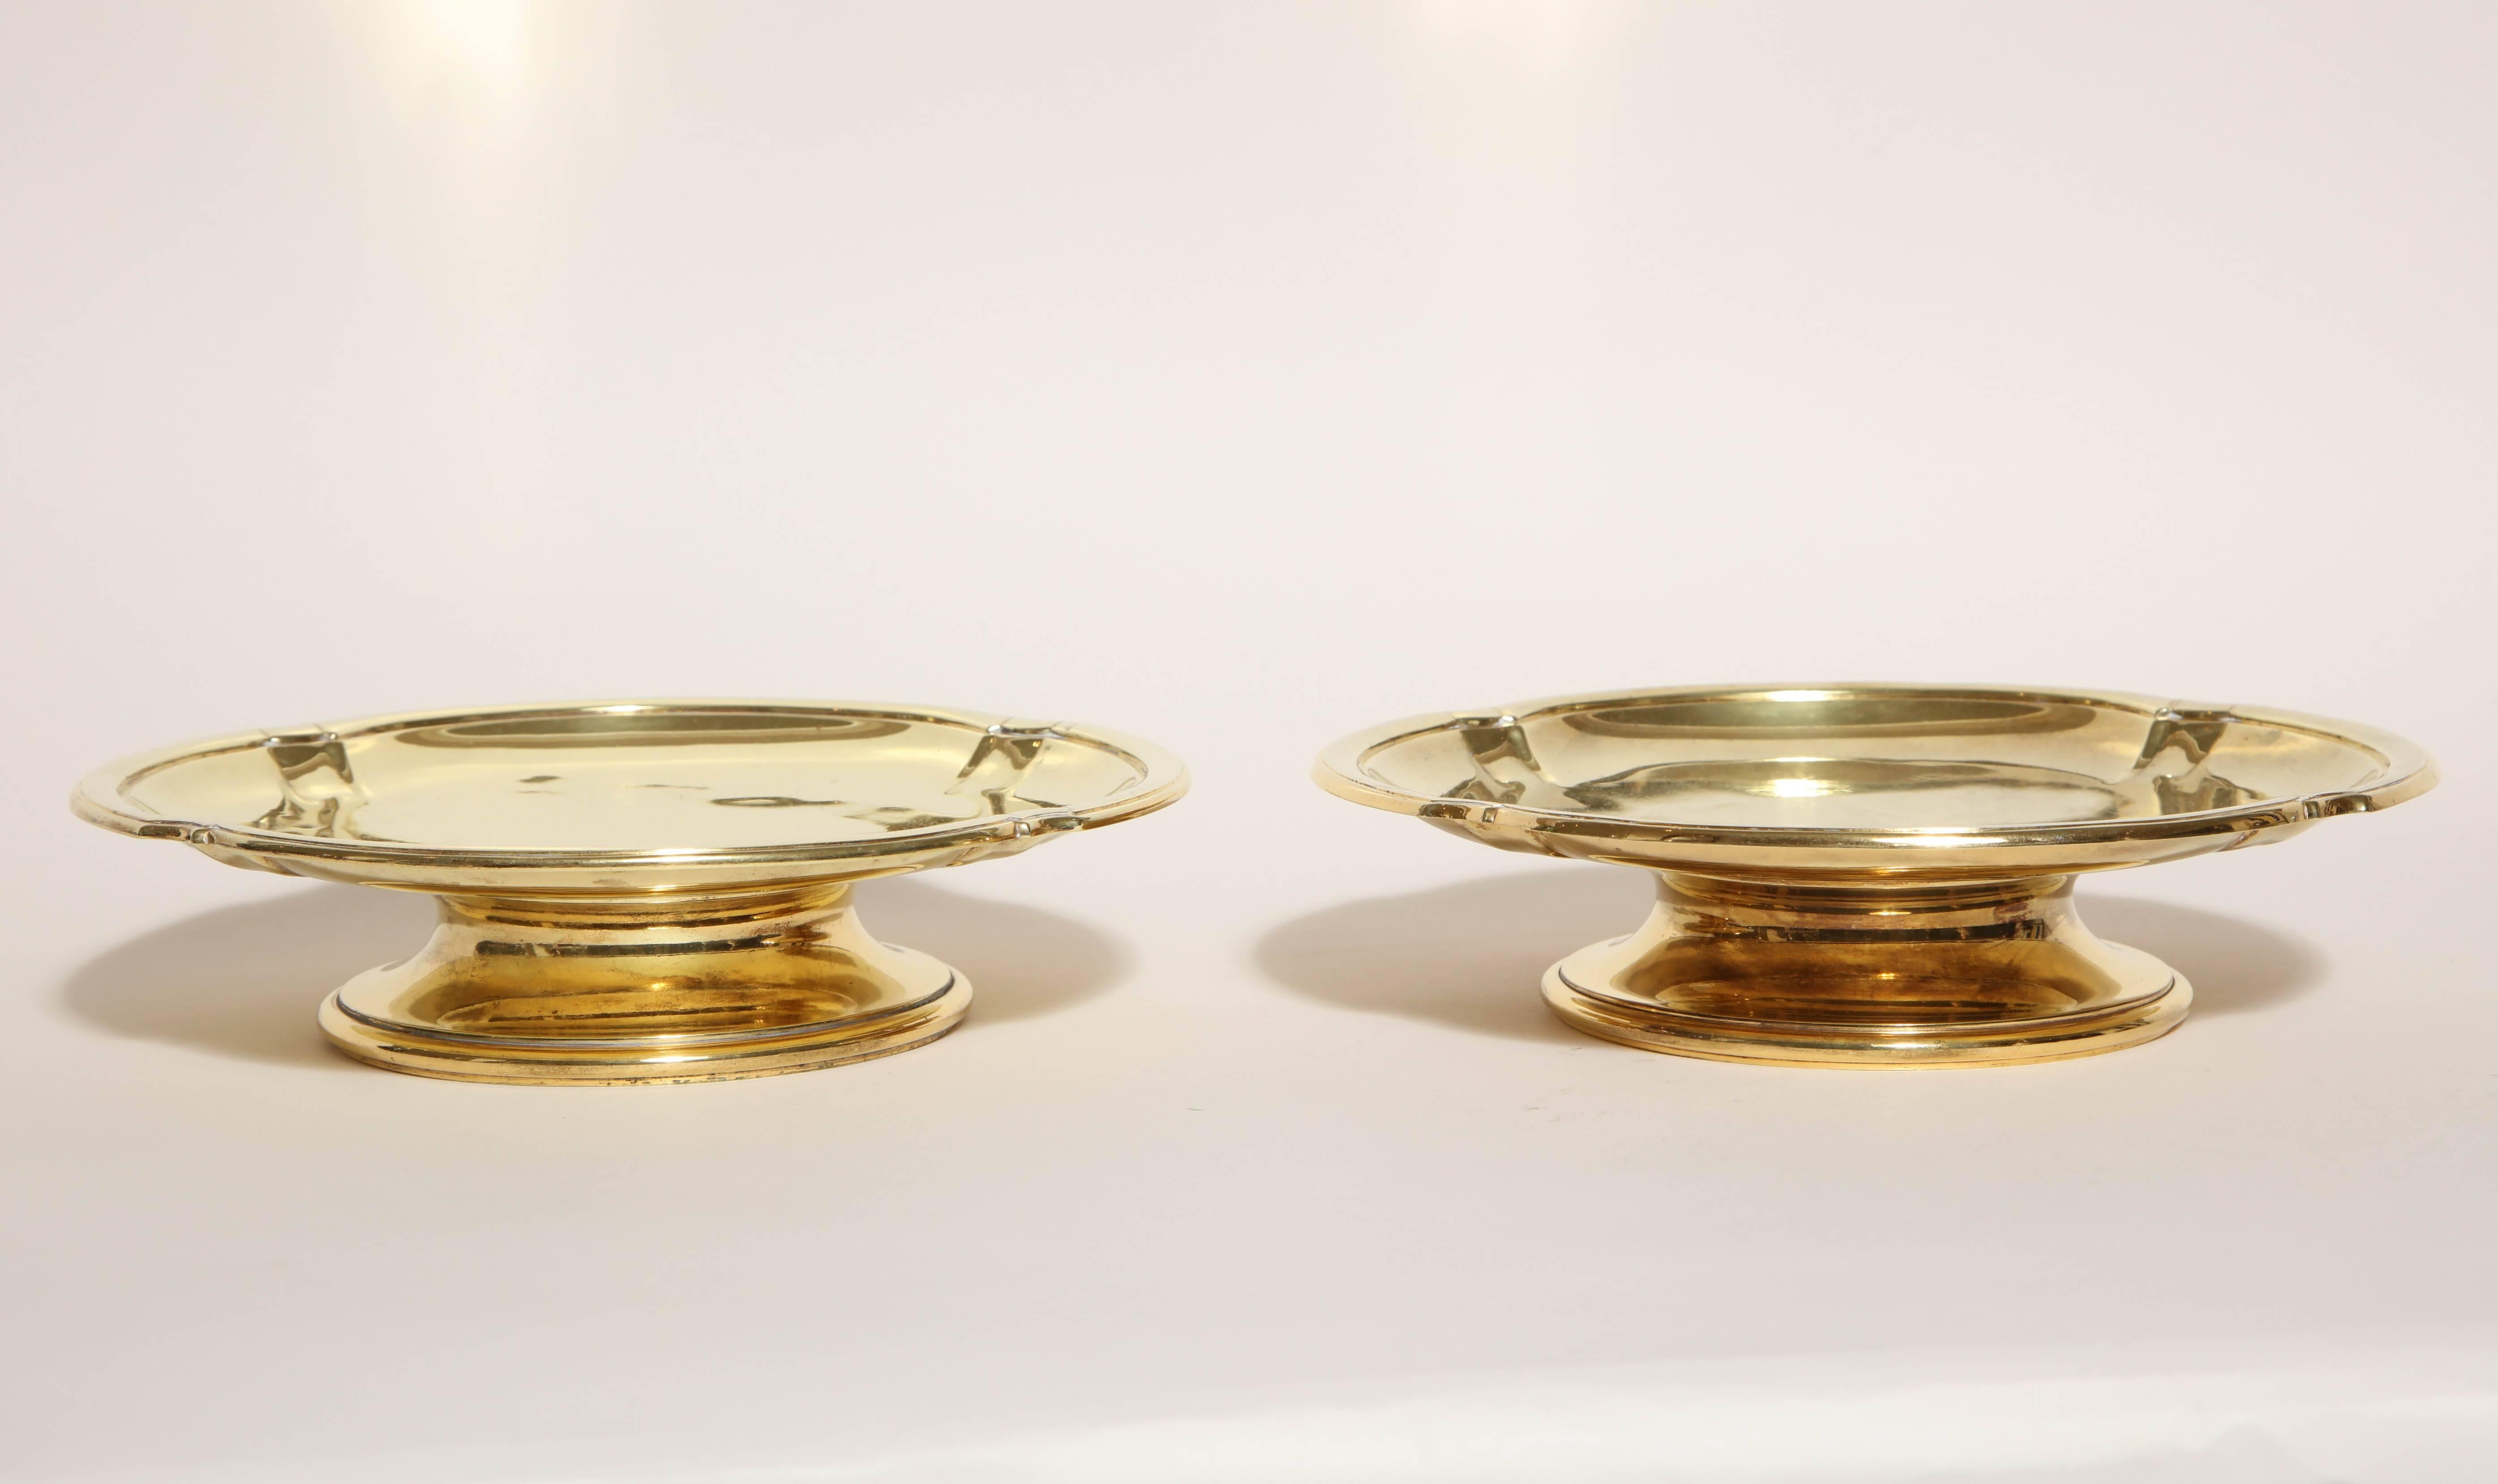 20th Century Gustave Keller Freres French Art Deco Pair of Vermeil Footed Tazzas/Centrepieces For Sale